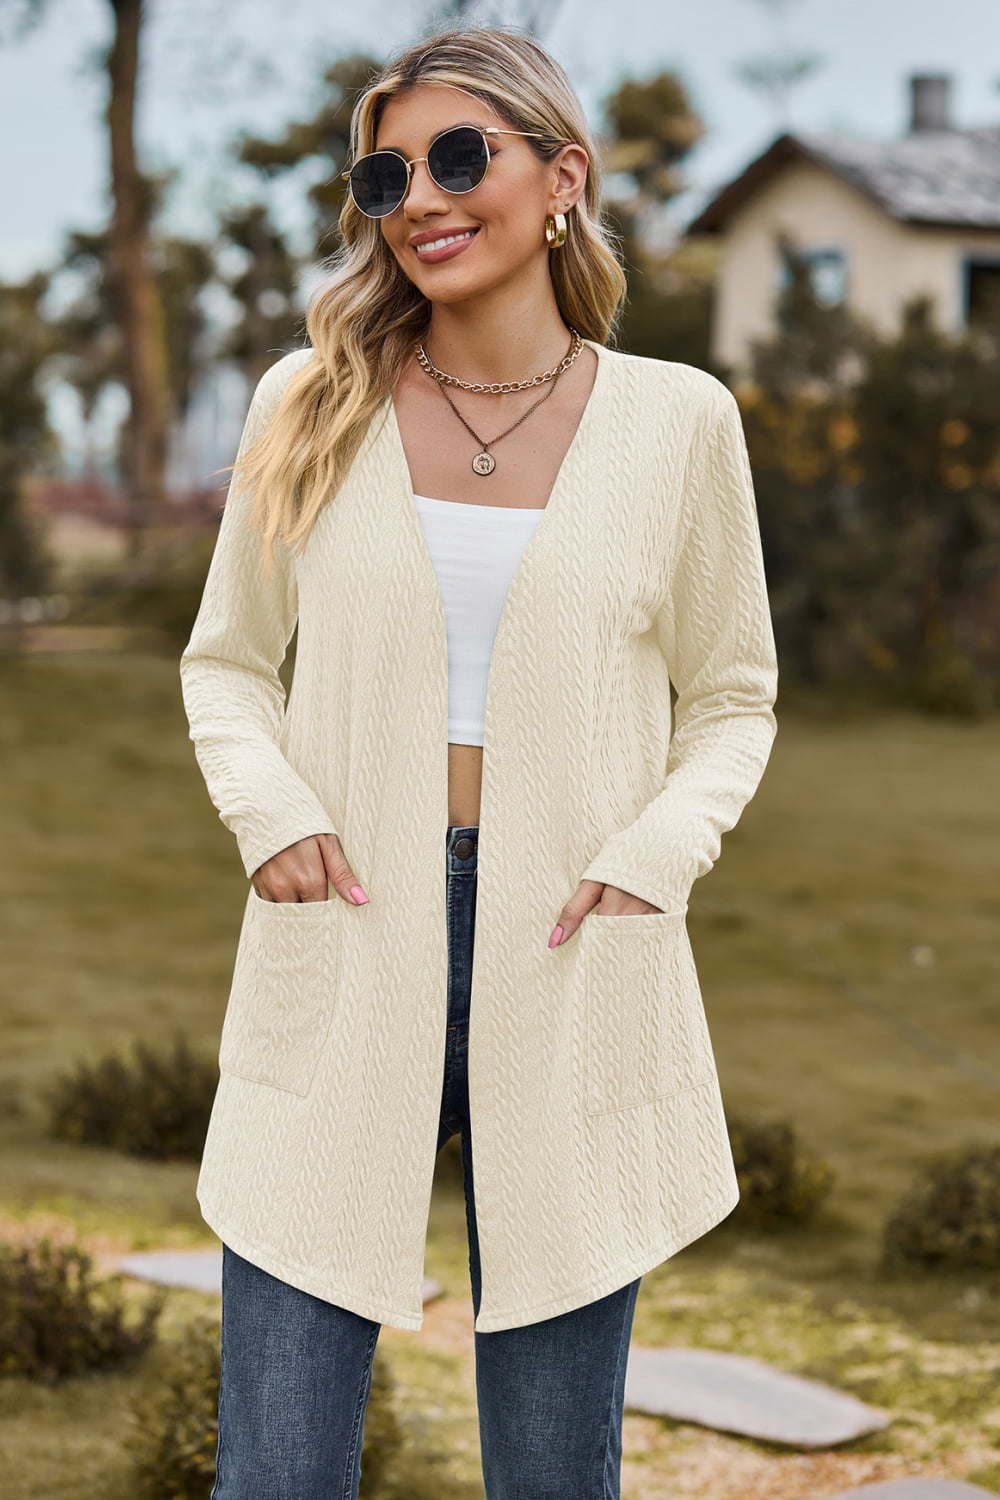 Cable-Knit Long Sleeve Cardigan with Pocket - White / S - Women’s Clothing & Accessories - Shirts & Tops - 15 - 2024